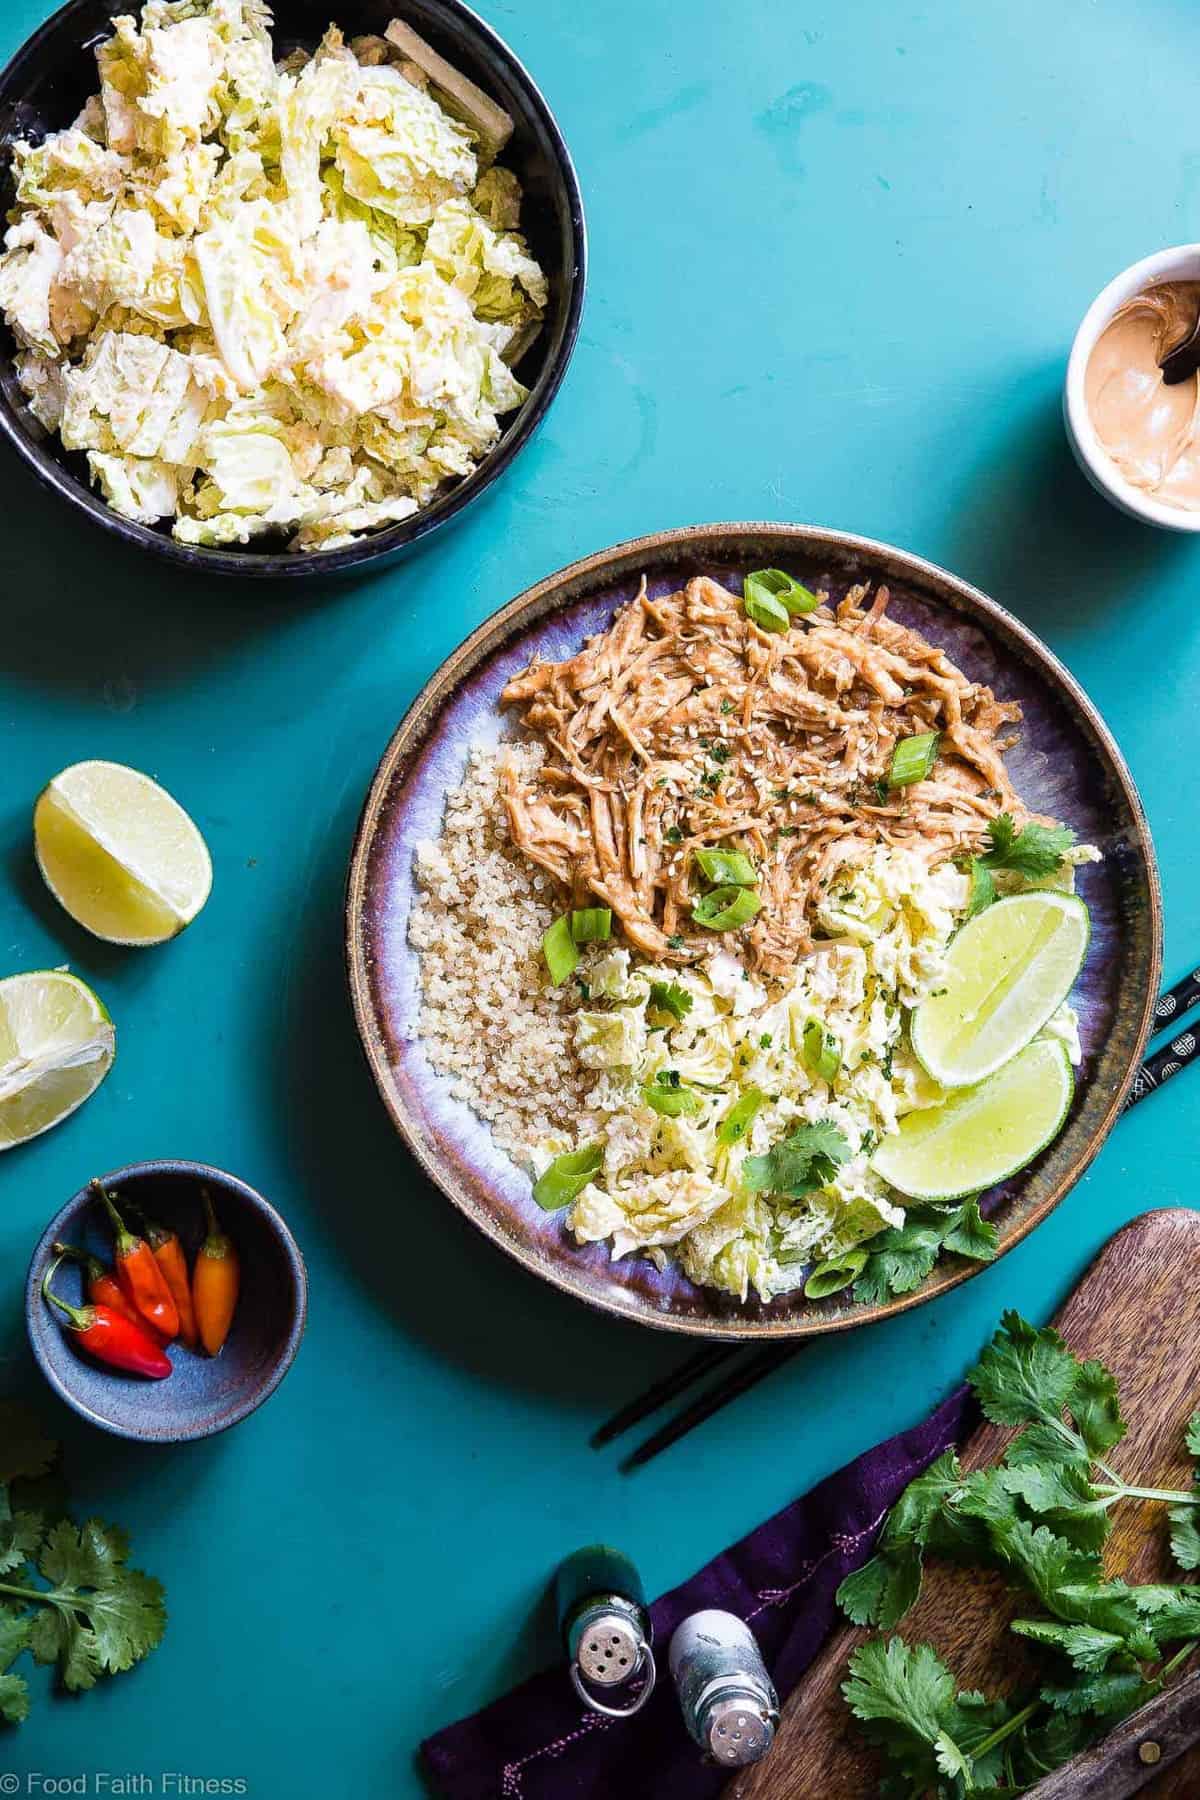 Slow Cooker Thai Peanut Butter Chicken Quinoa Bowls - CREAMY crockpot Thai peanut chicken is mixed with quinoa and a spicy cabbage slaw to make a family friendly, gluten free and healthy meal! The slow cooker does the work for you! | #Foodfaithfitness | #Glutenfree #Dairyfree #Healthy #Slowcooker #Crockpot